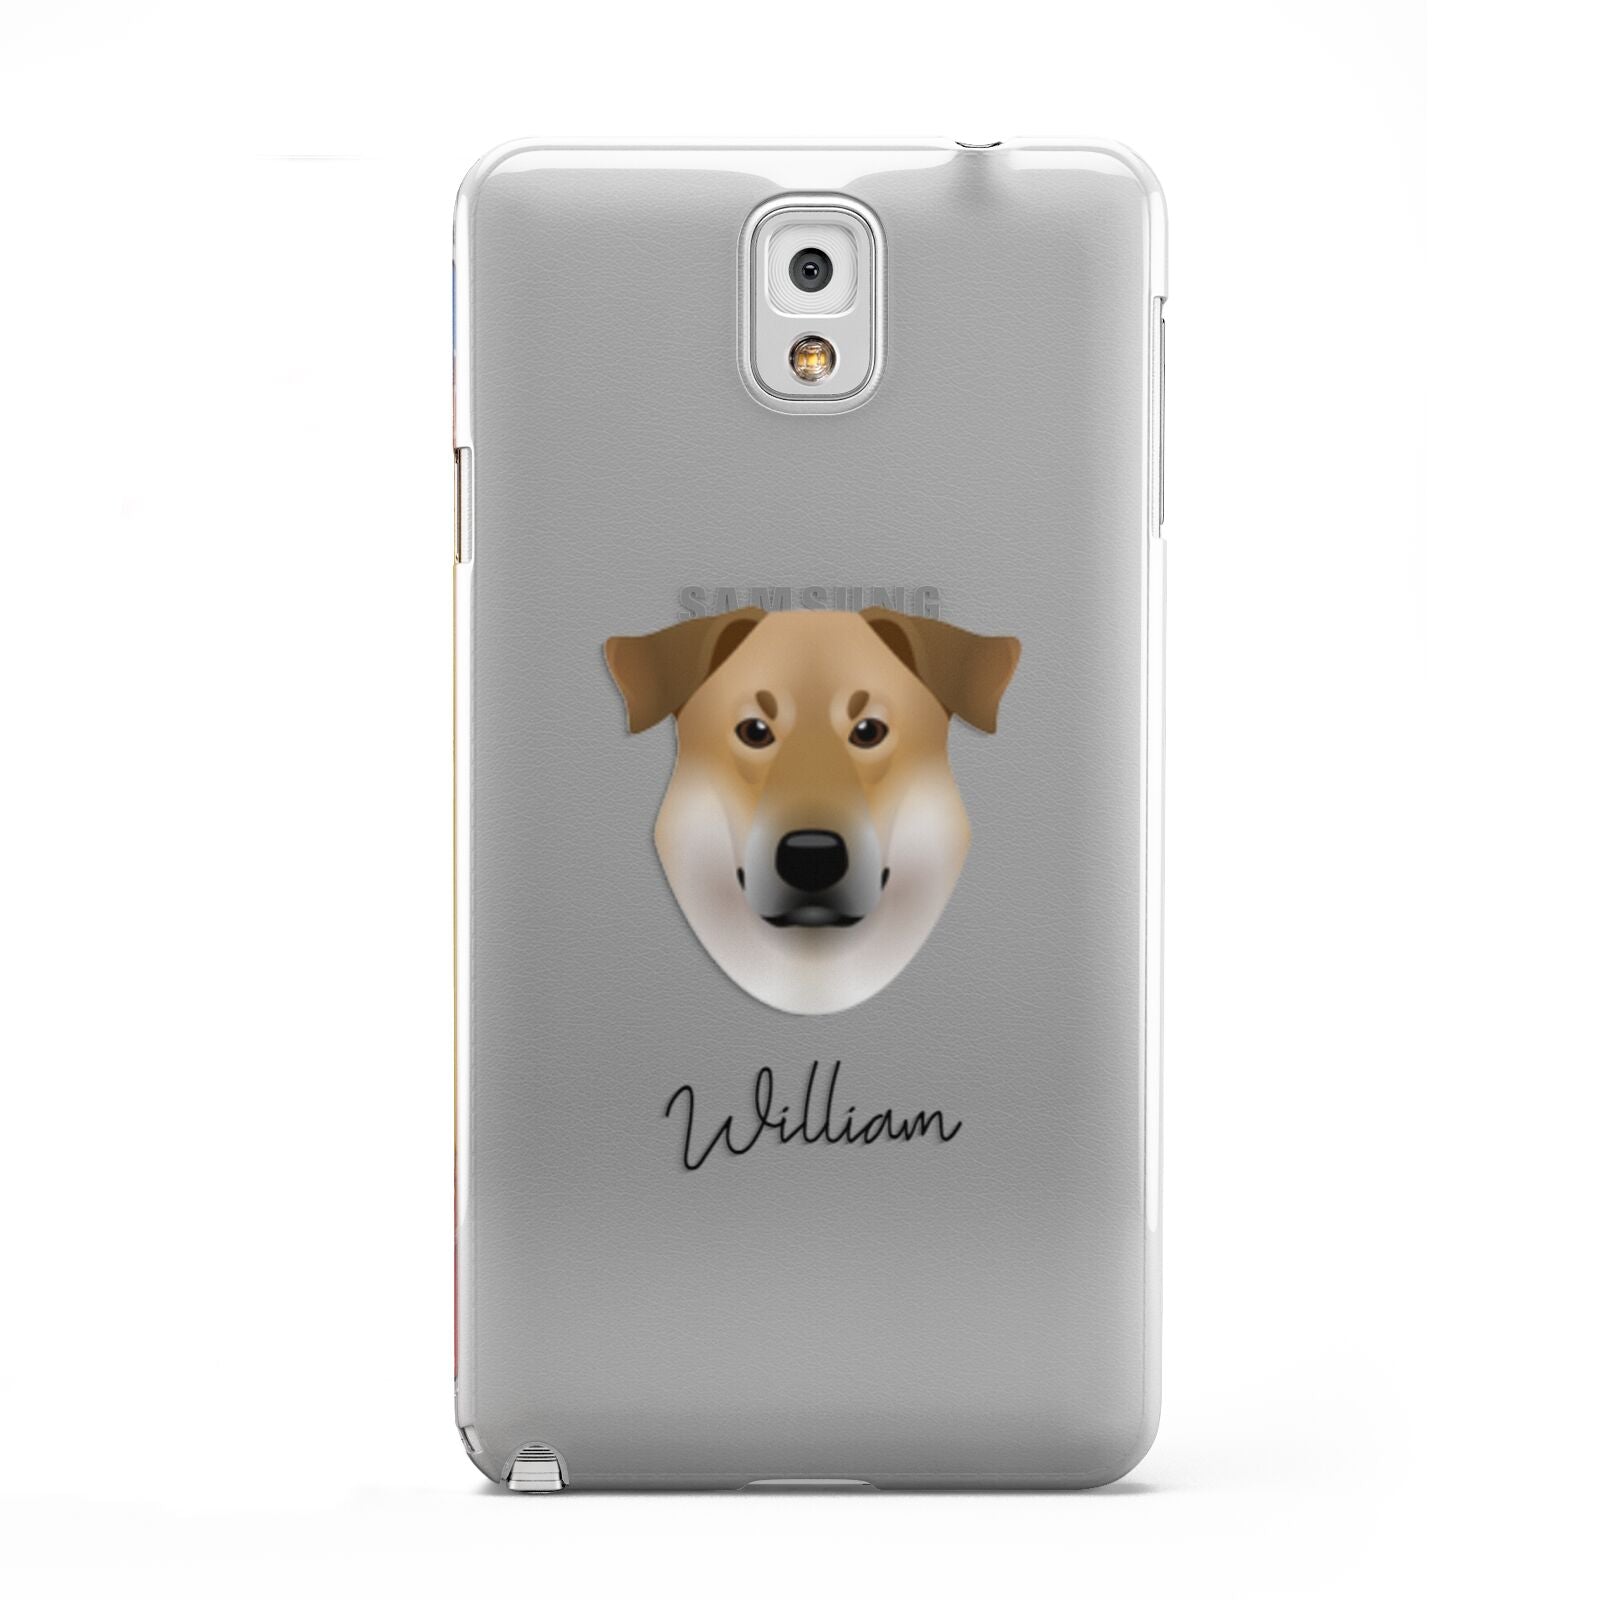 Chinook Personalised Samsung Galaxy Note 3 Case